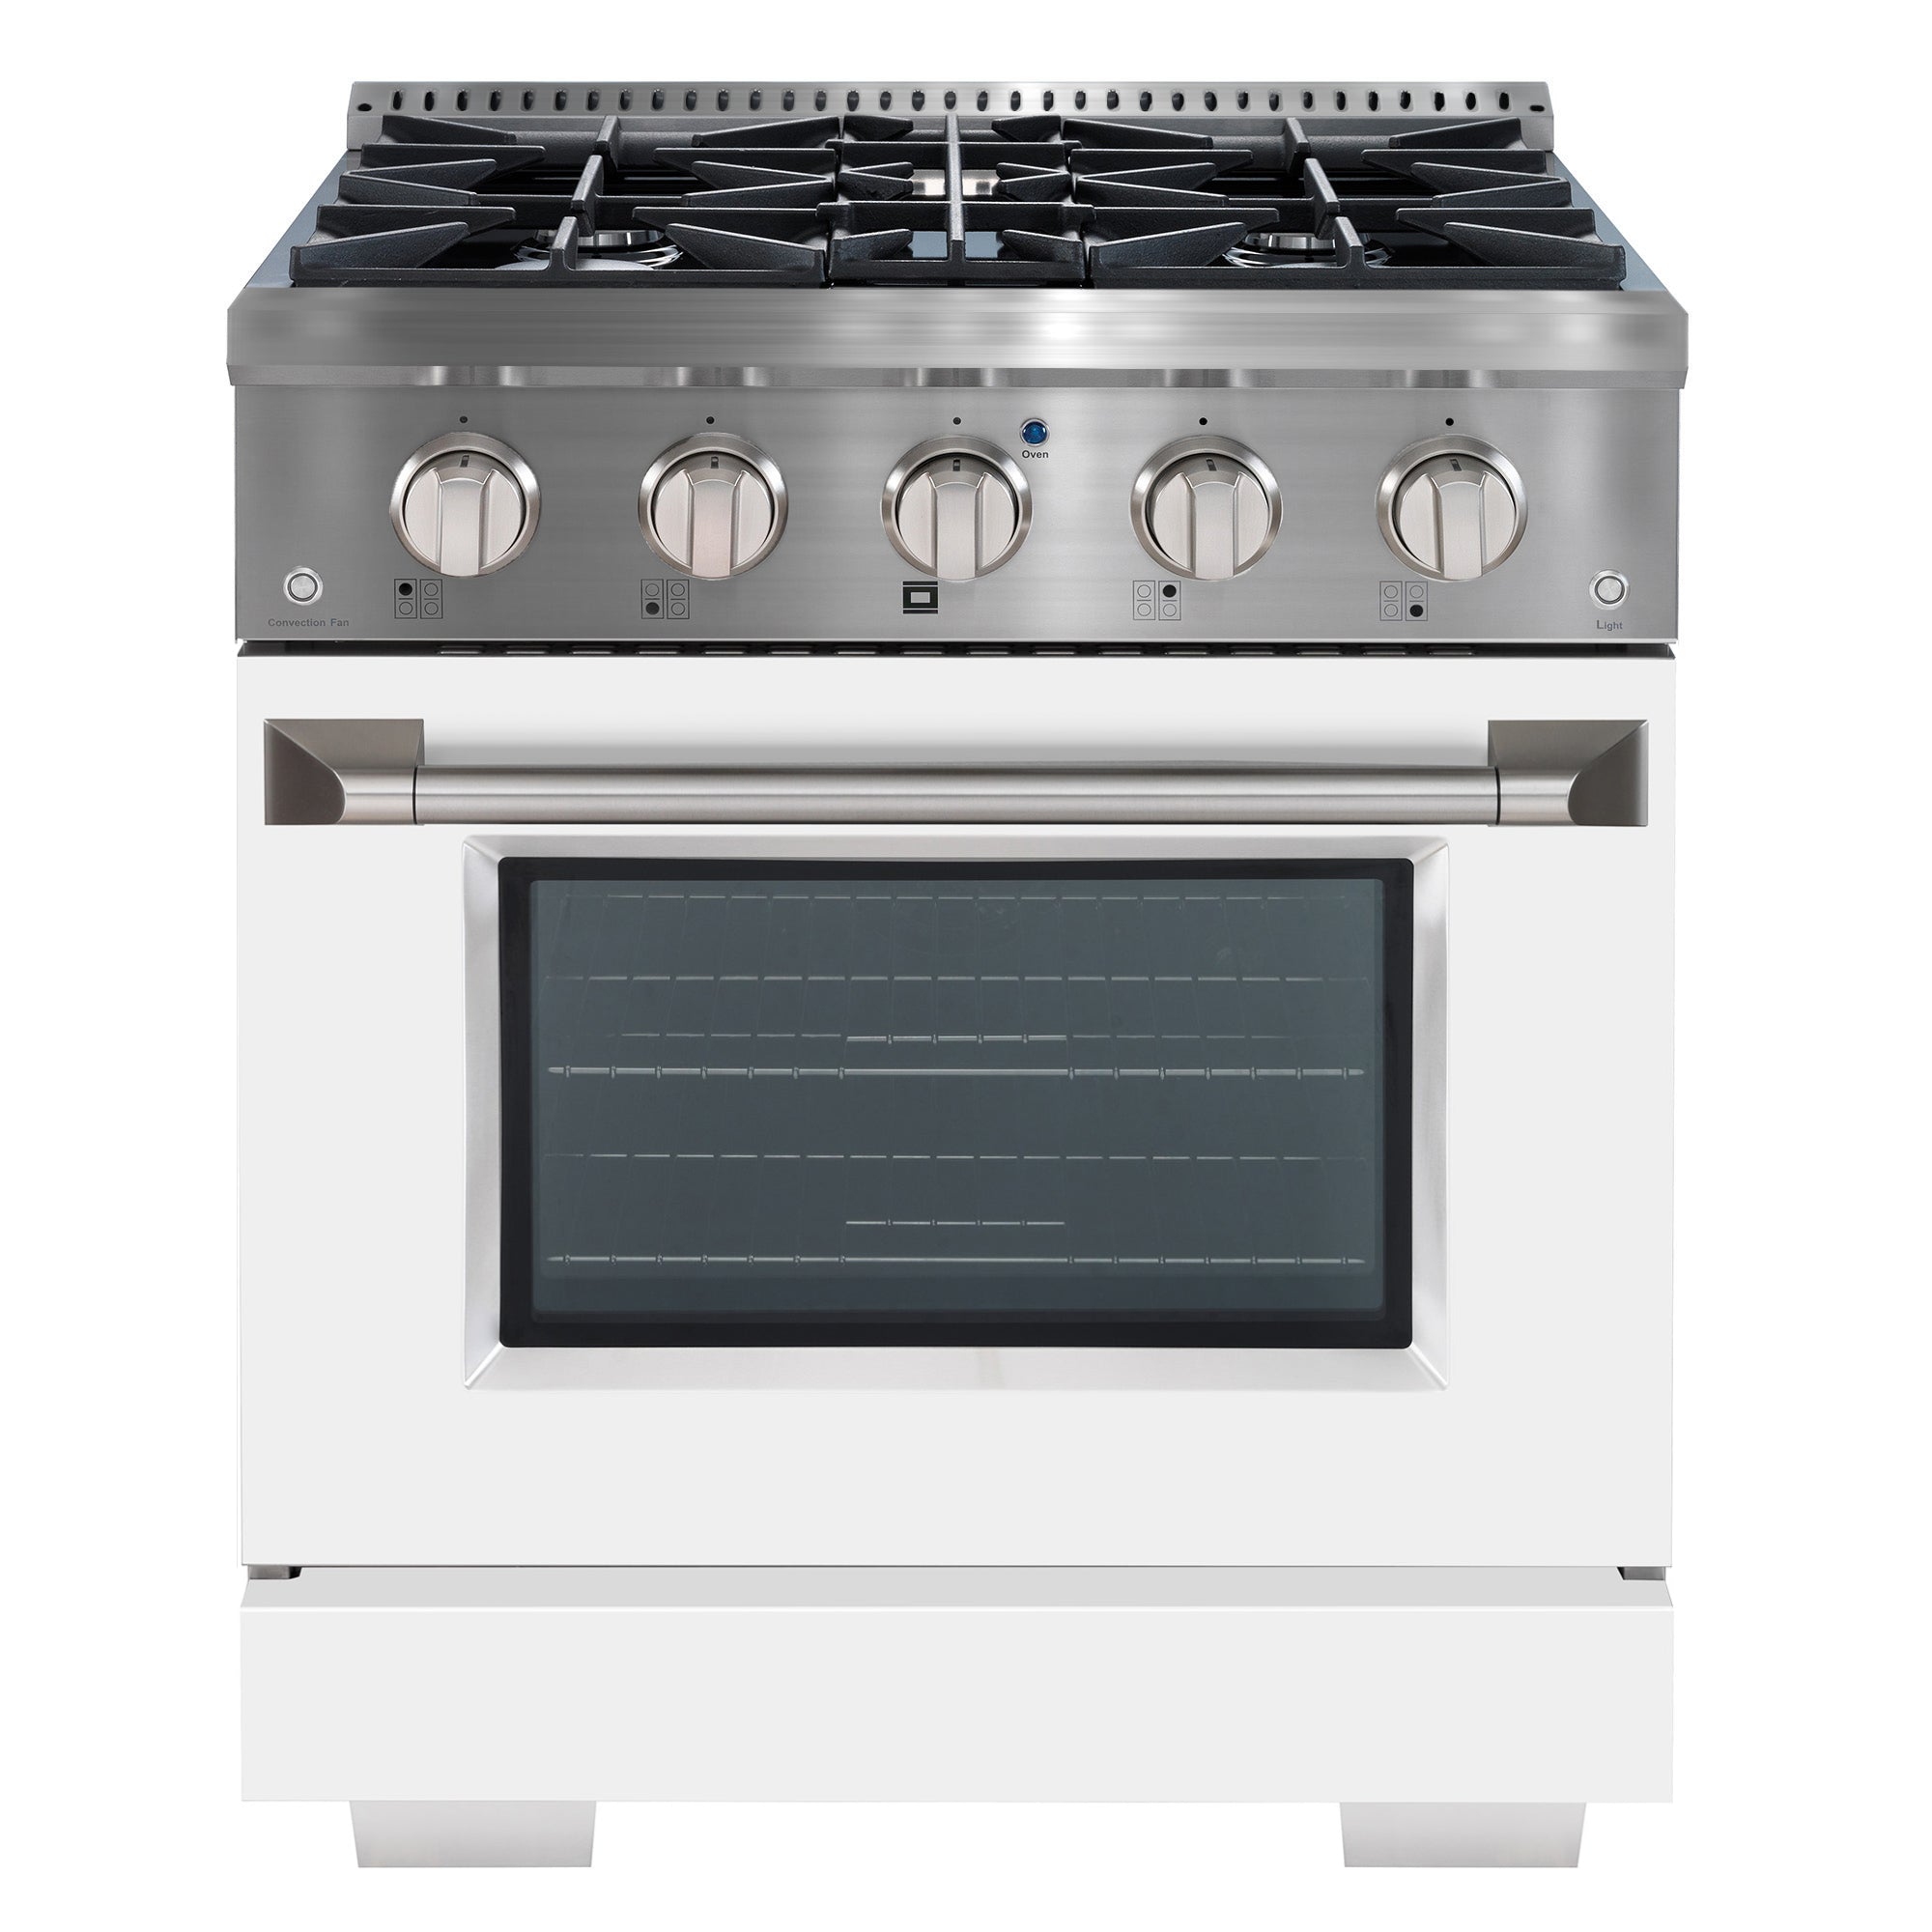 Ancona 30” 4.2 cu. ft. Dual Fuel Range with 4 Burners and Convection Oven in Stainless Steel with White Door